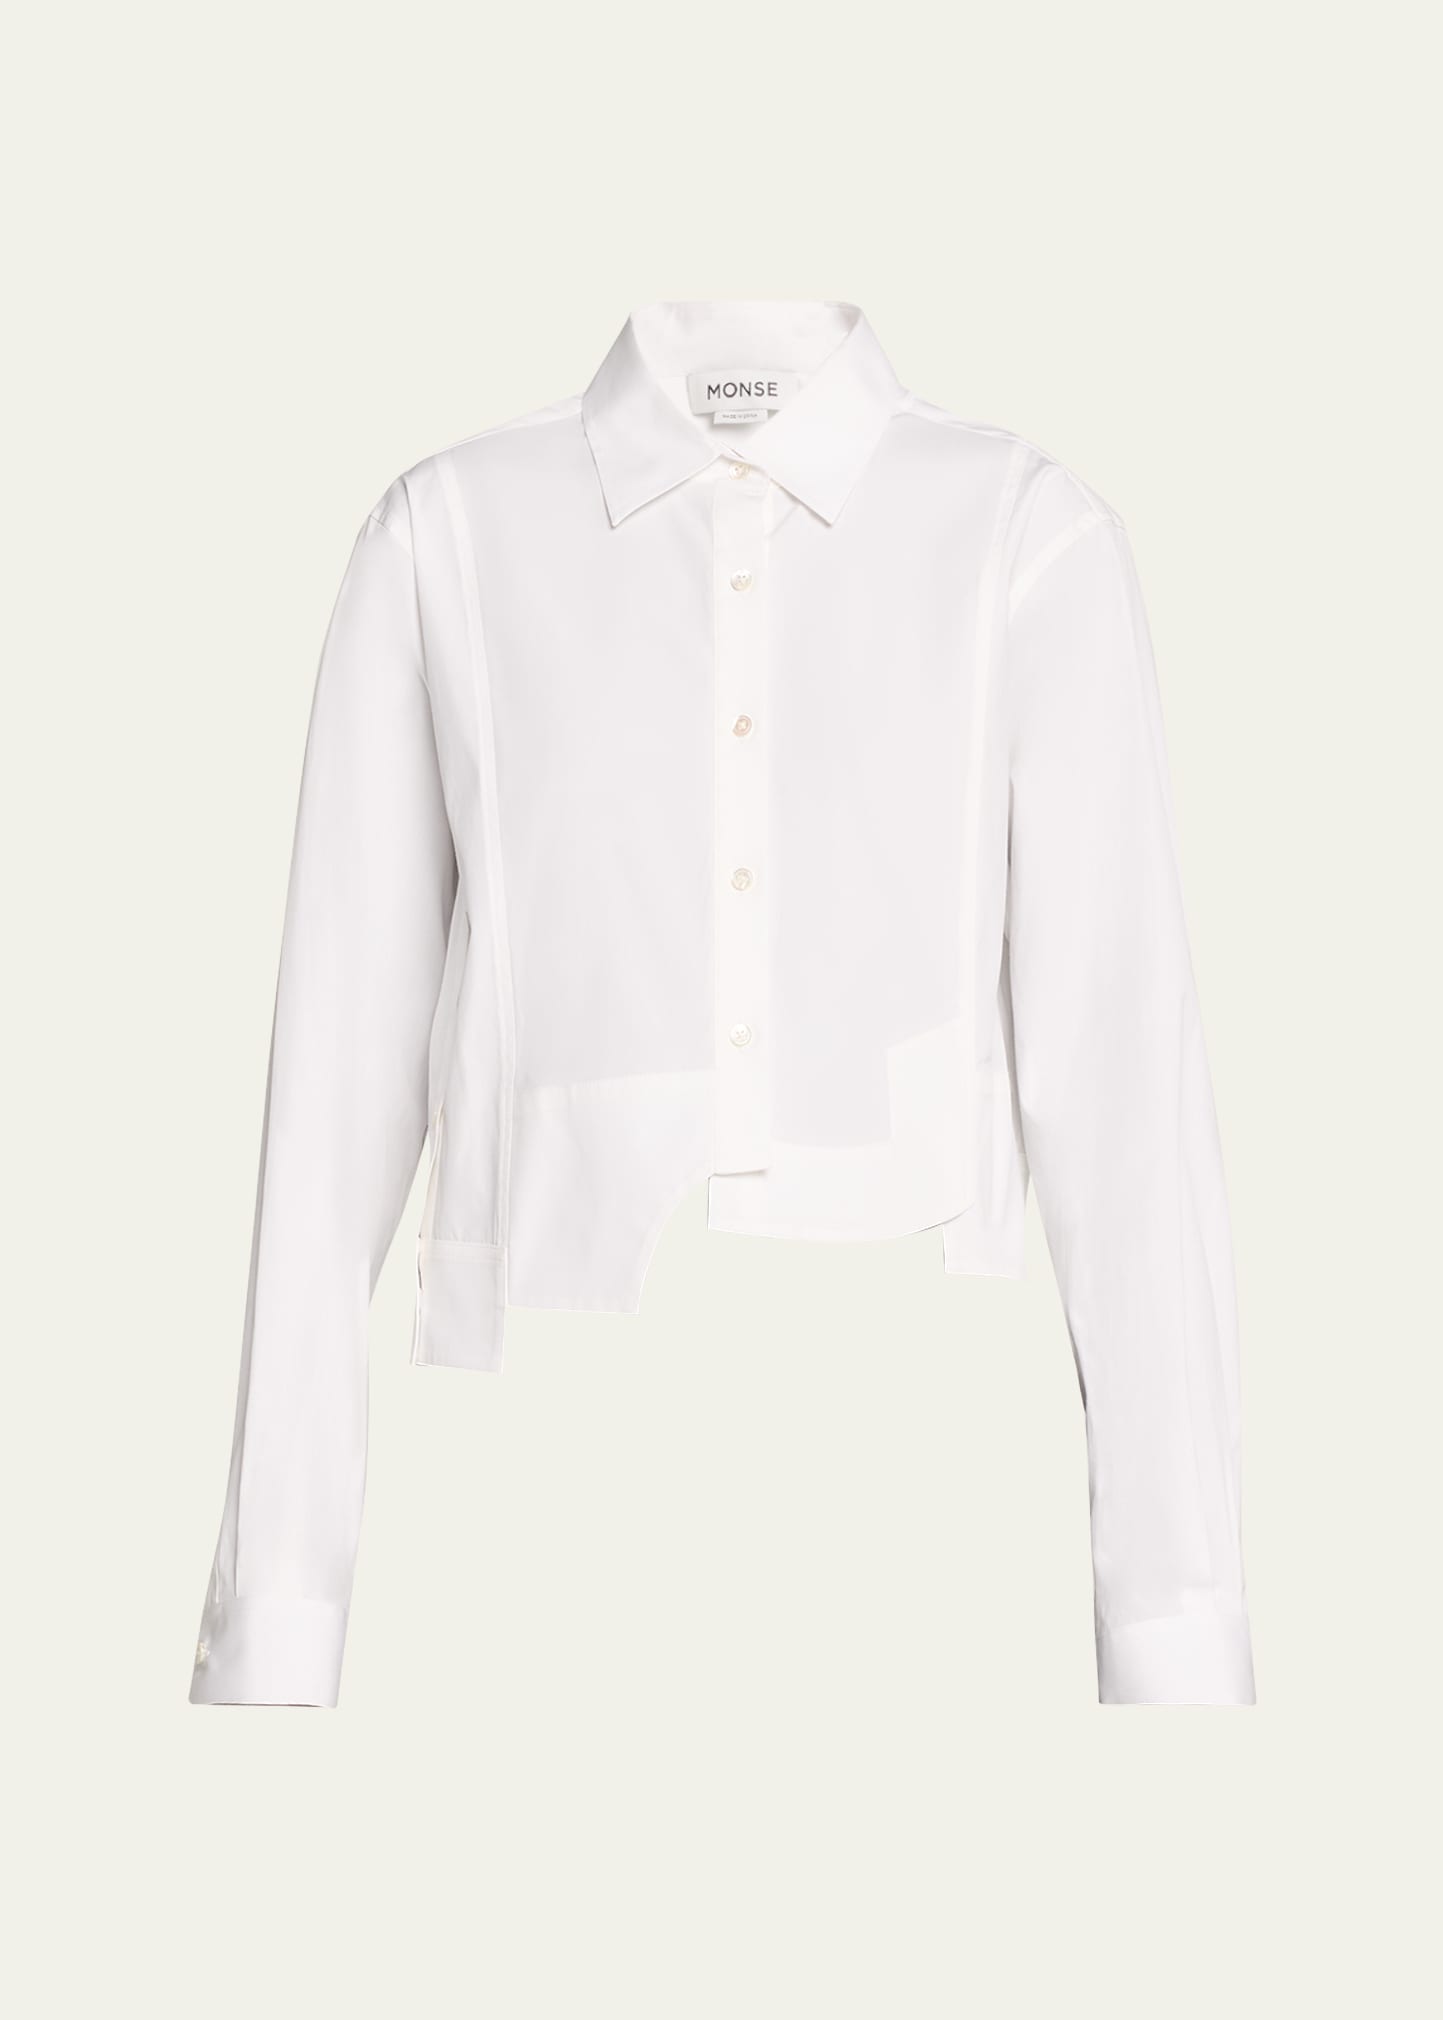 MONSE DECONSTRUCTED CROPPED BUTTON DOWN TOP